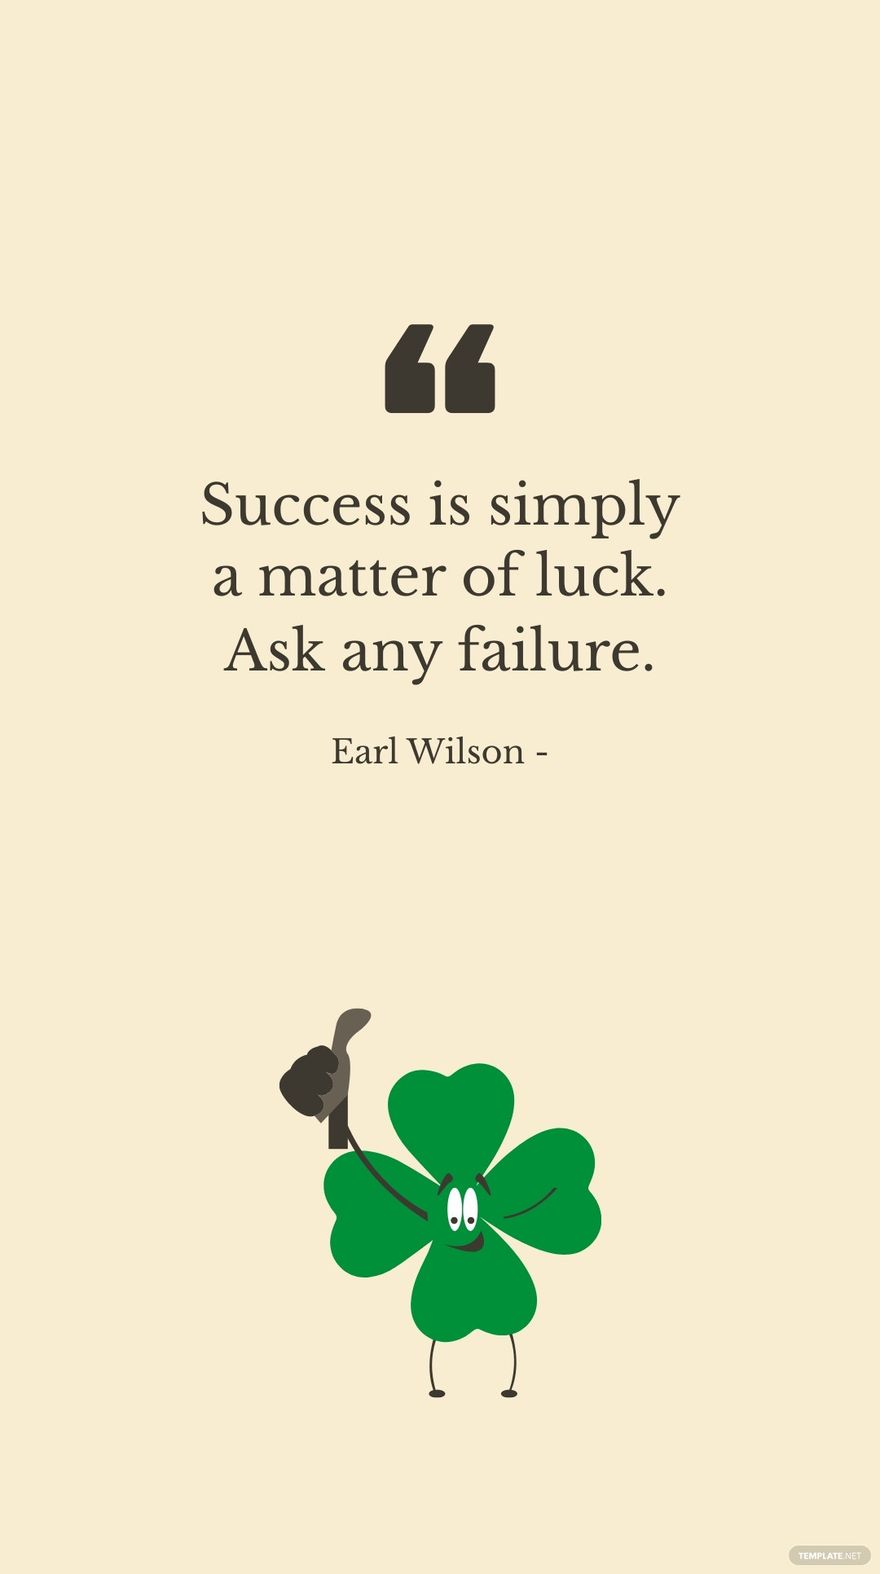 Free Earl Wilson - Success is simply a matter of luck. Ask any failure.